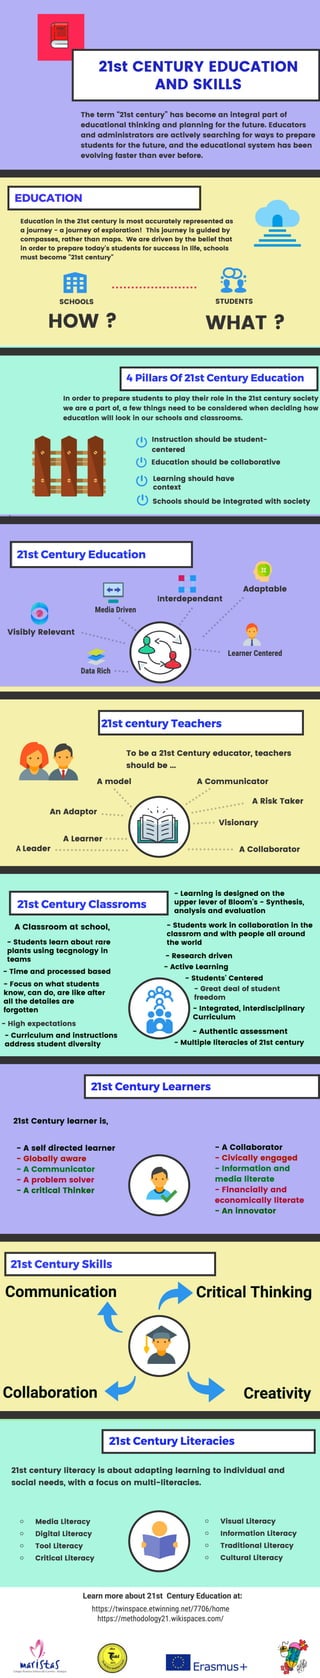 21st Century Education and Skills Infographic